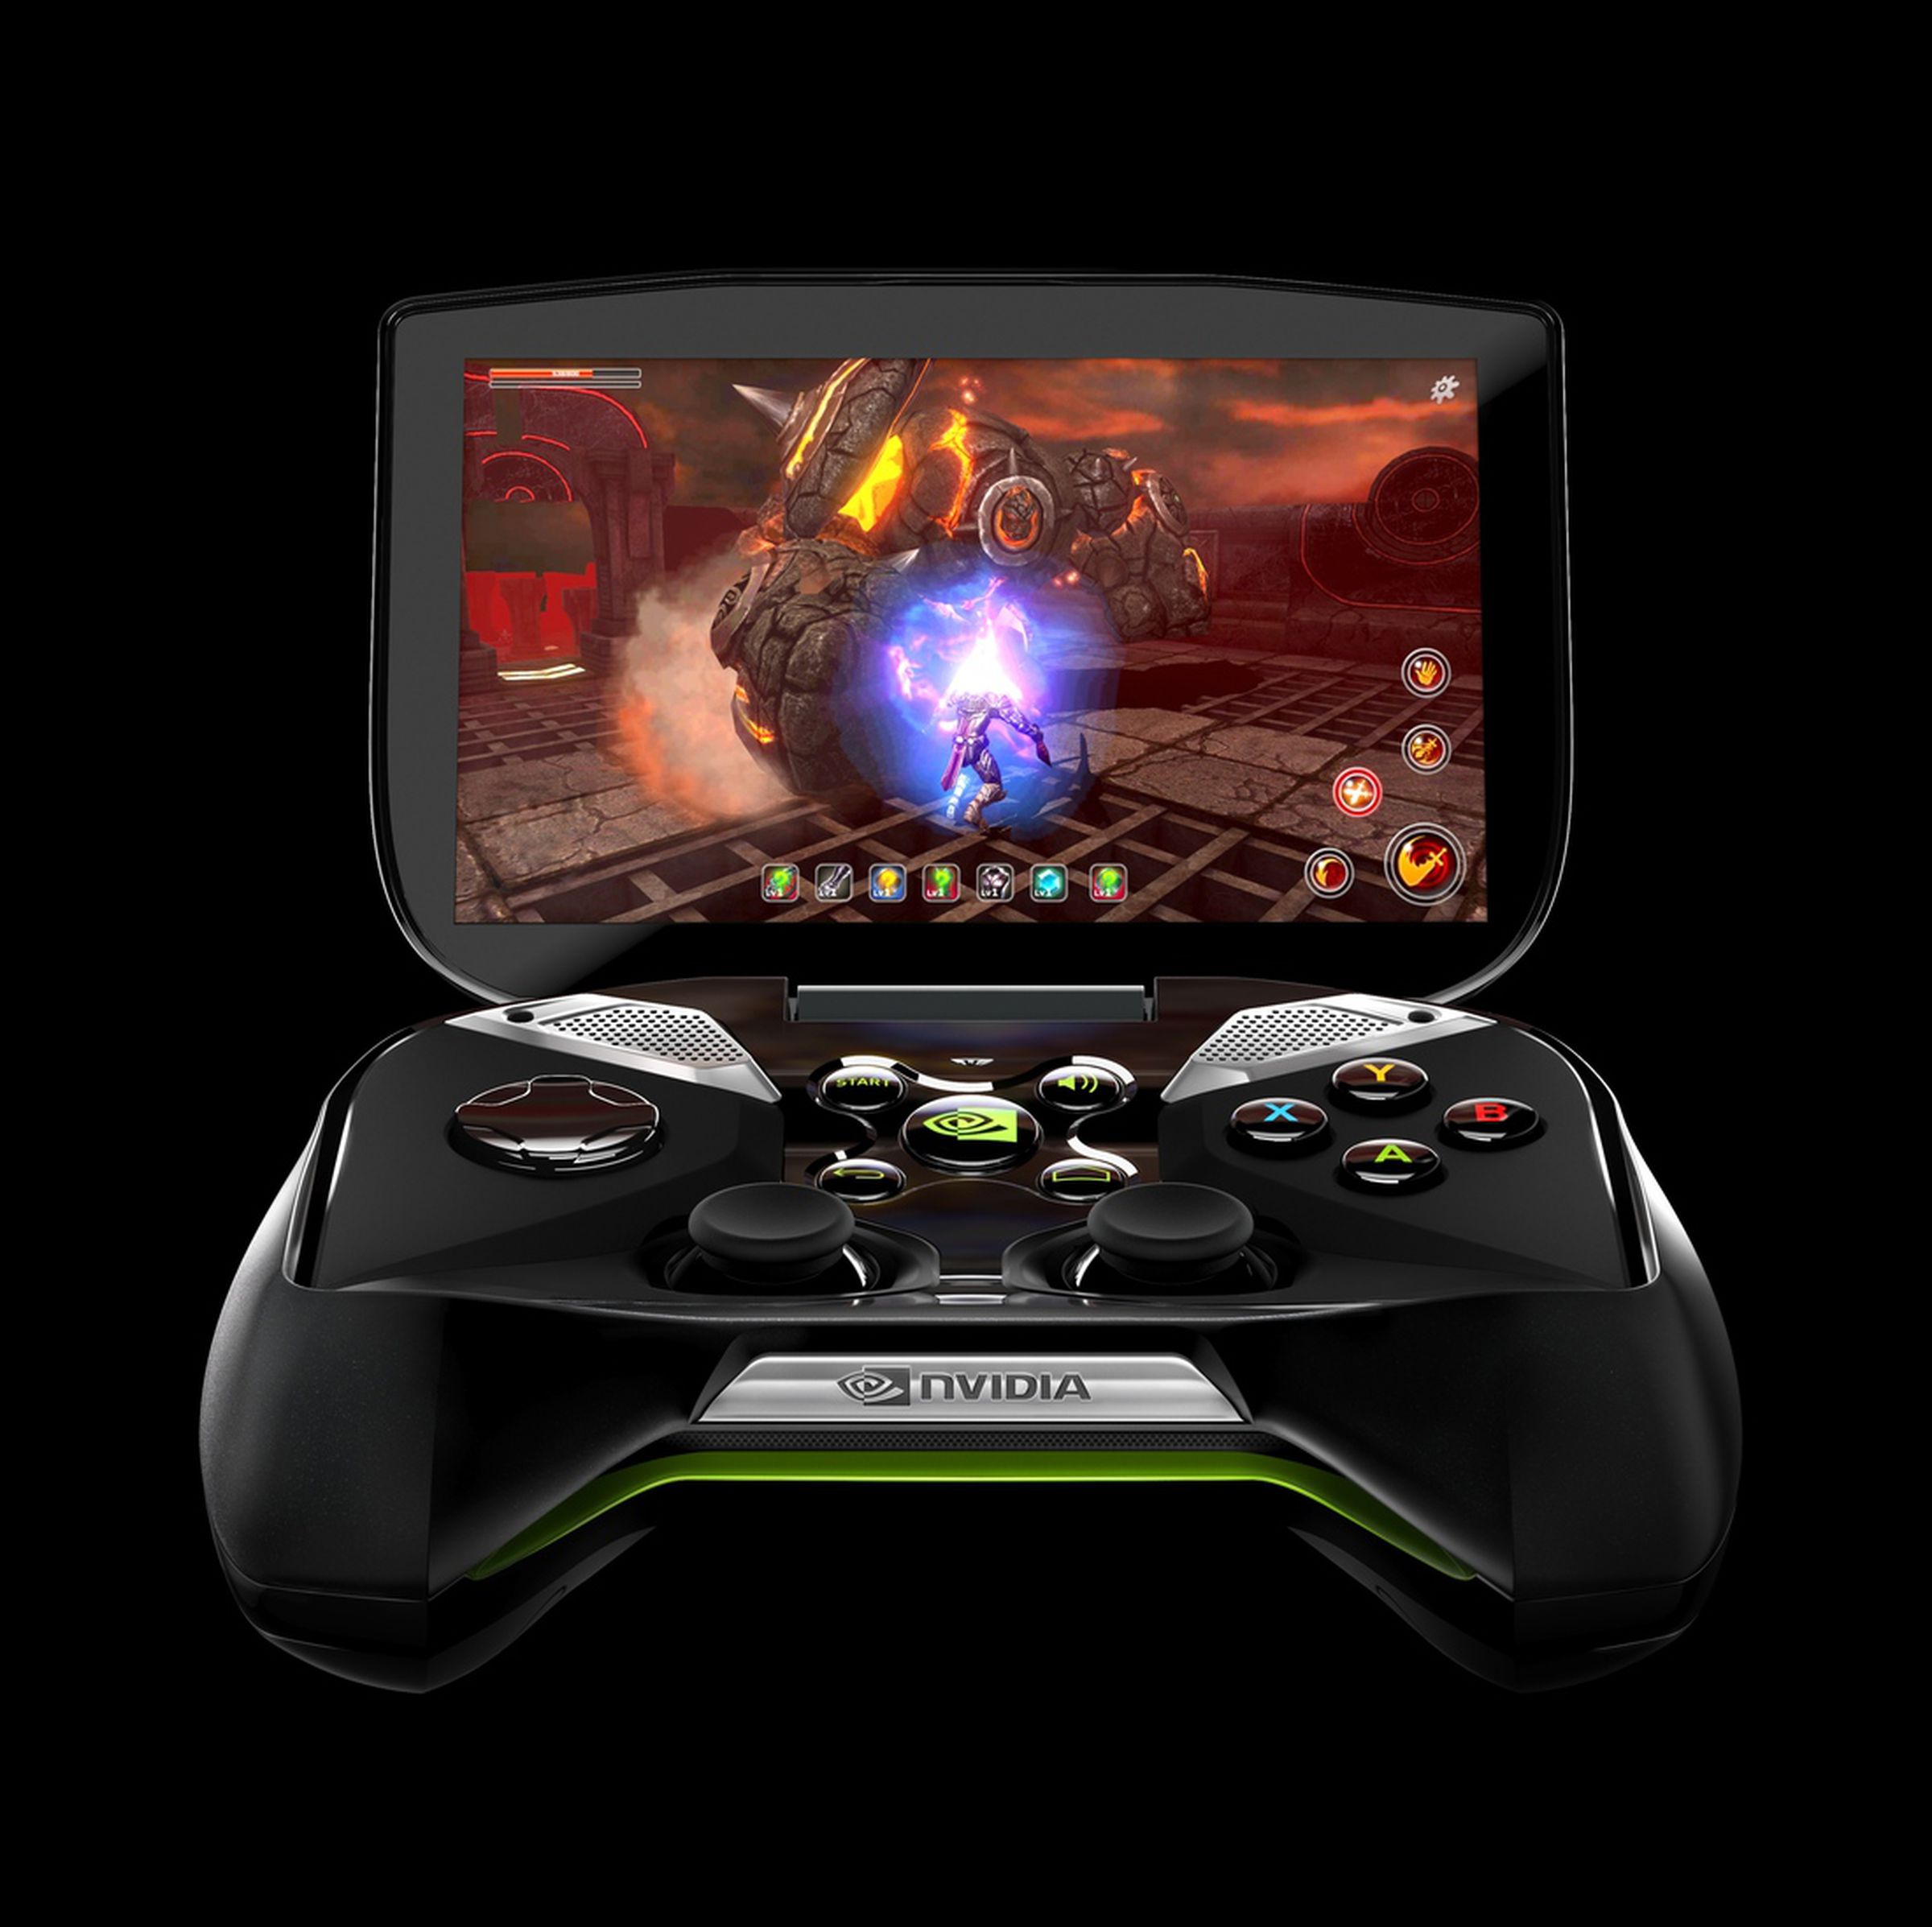 Nvidia Project Shield press pictures